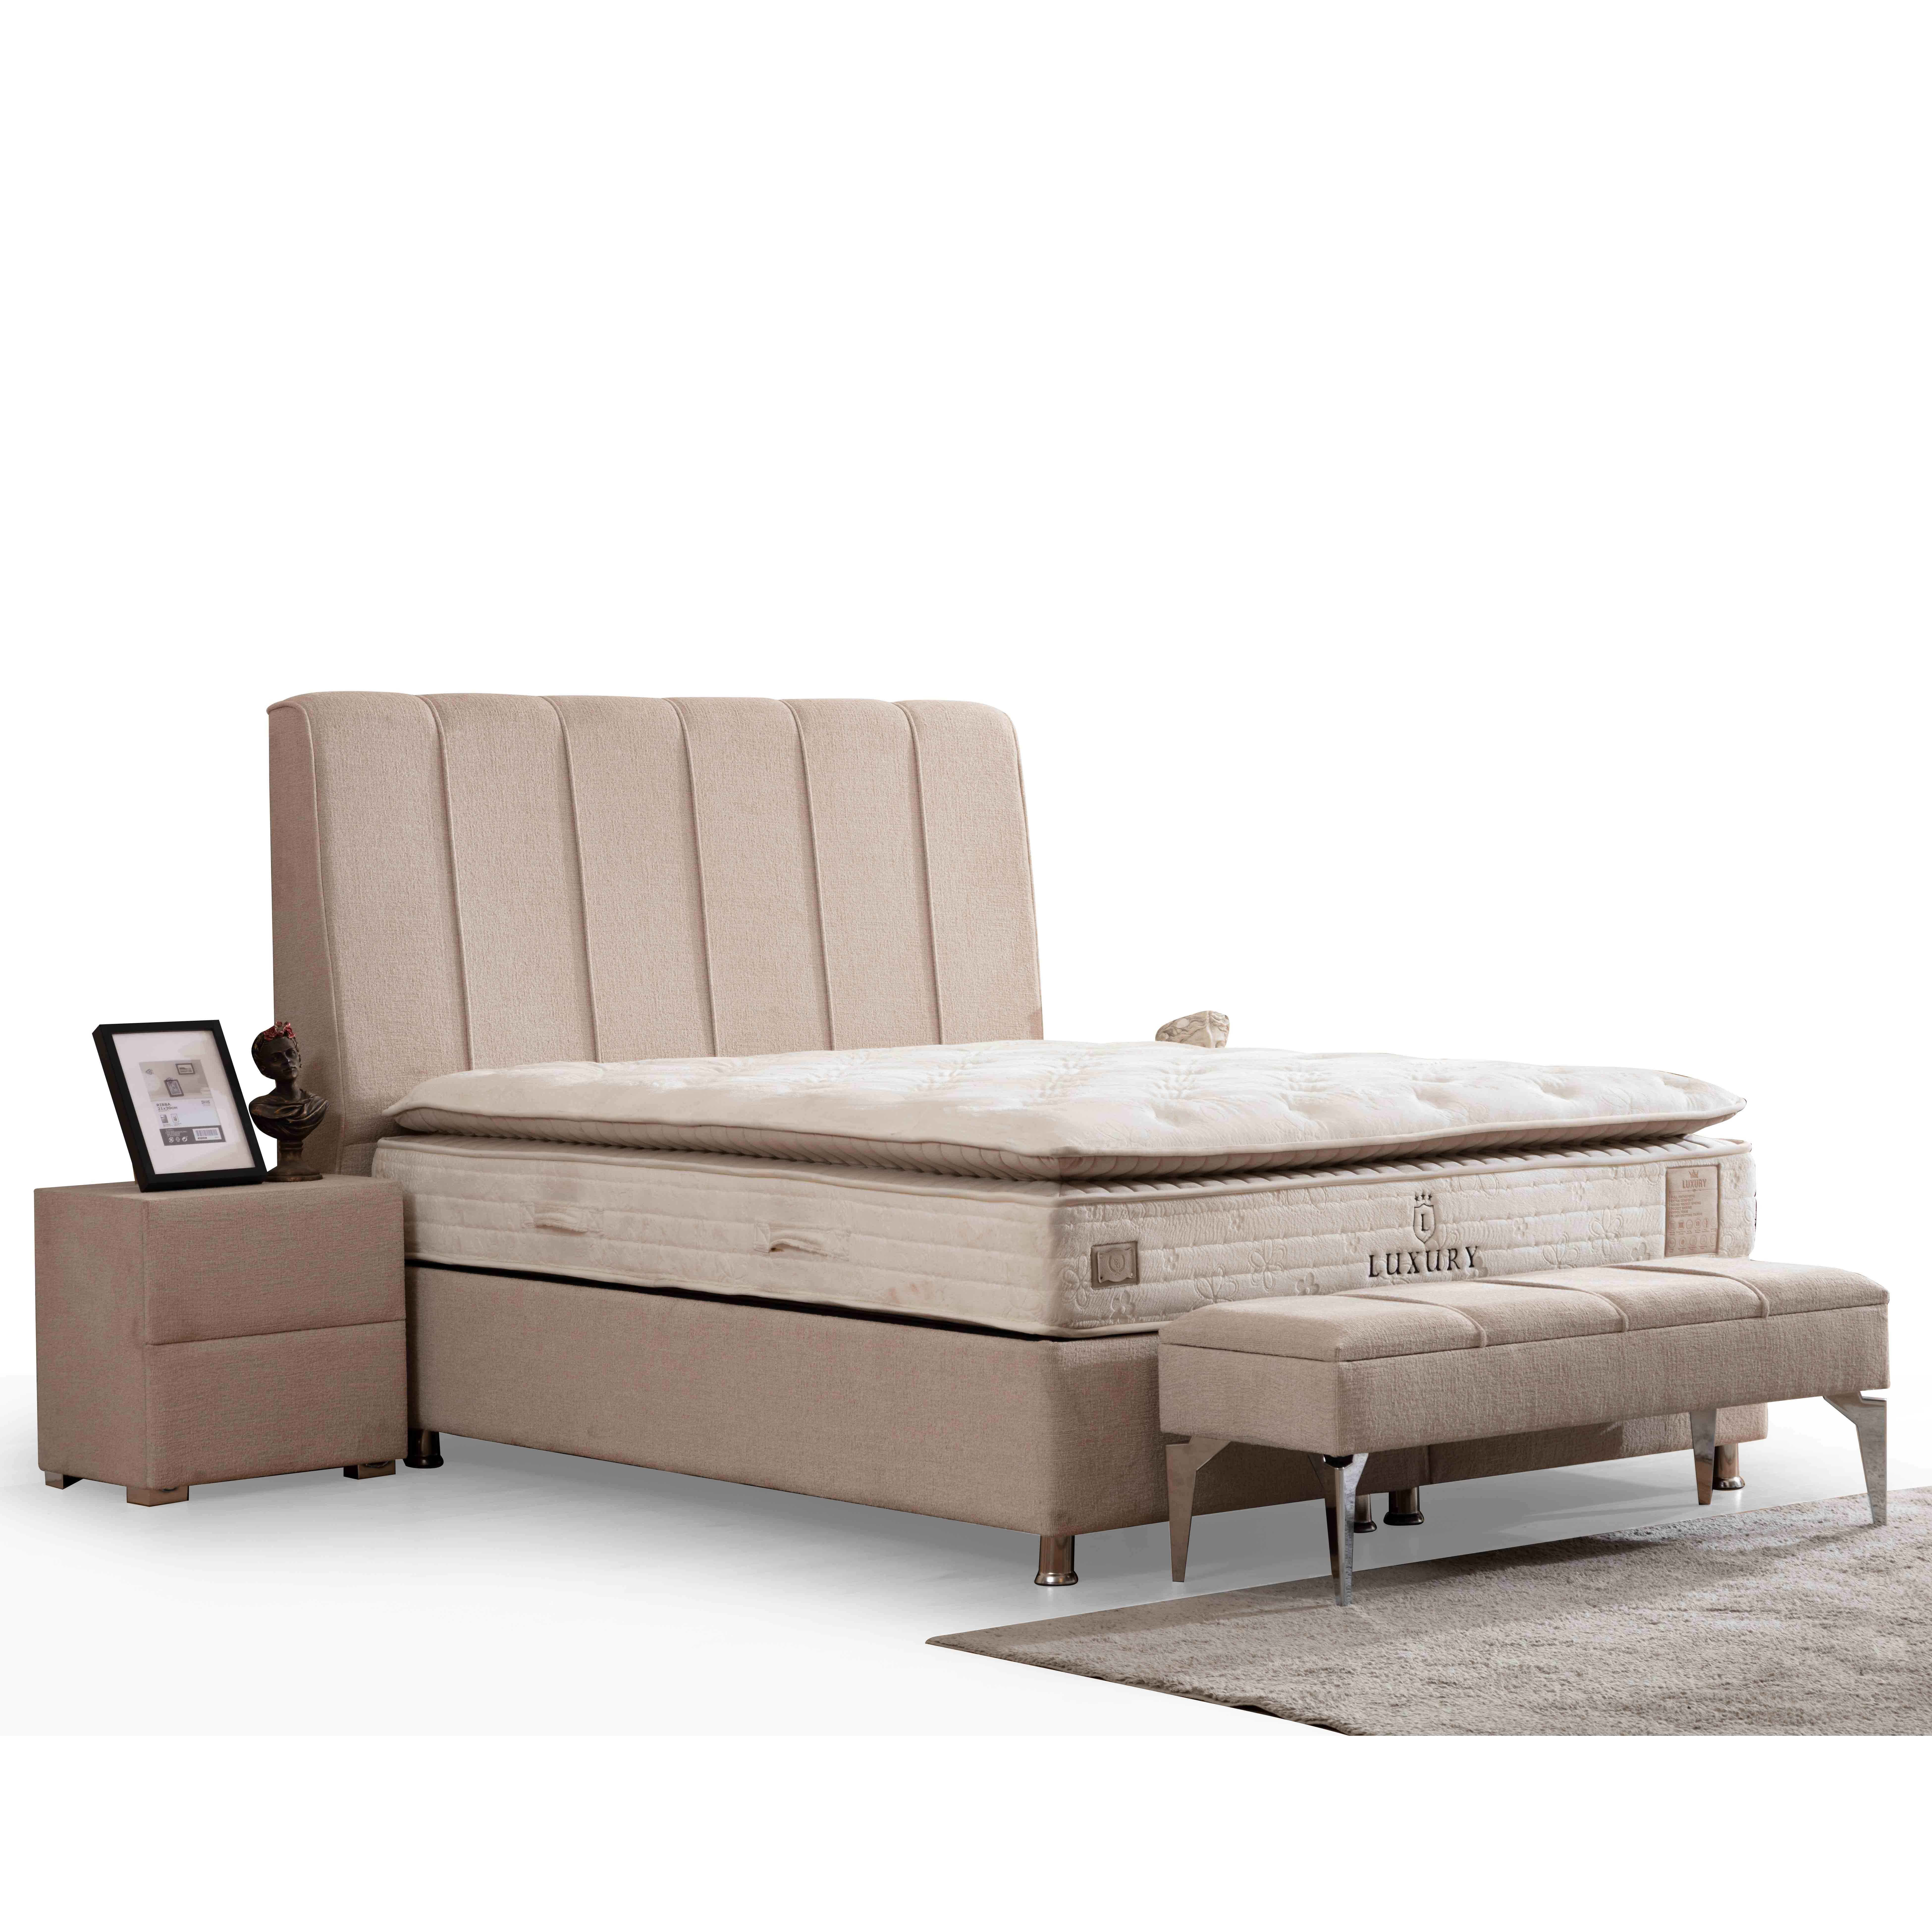 Prime Bed With Storage 120*200